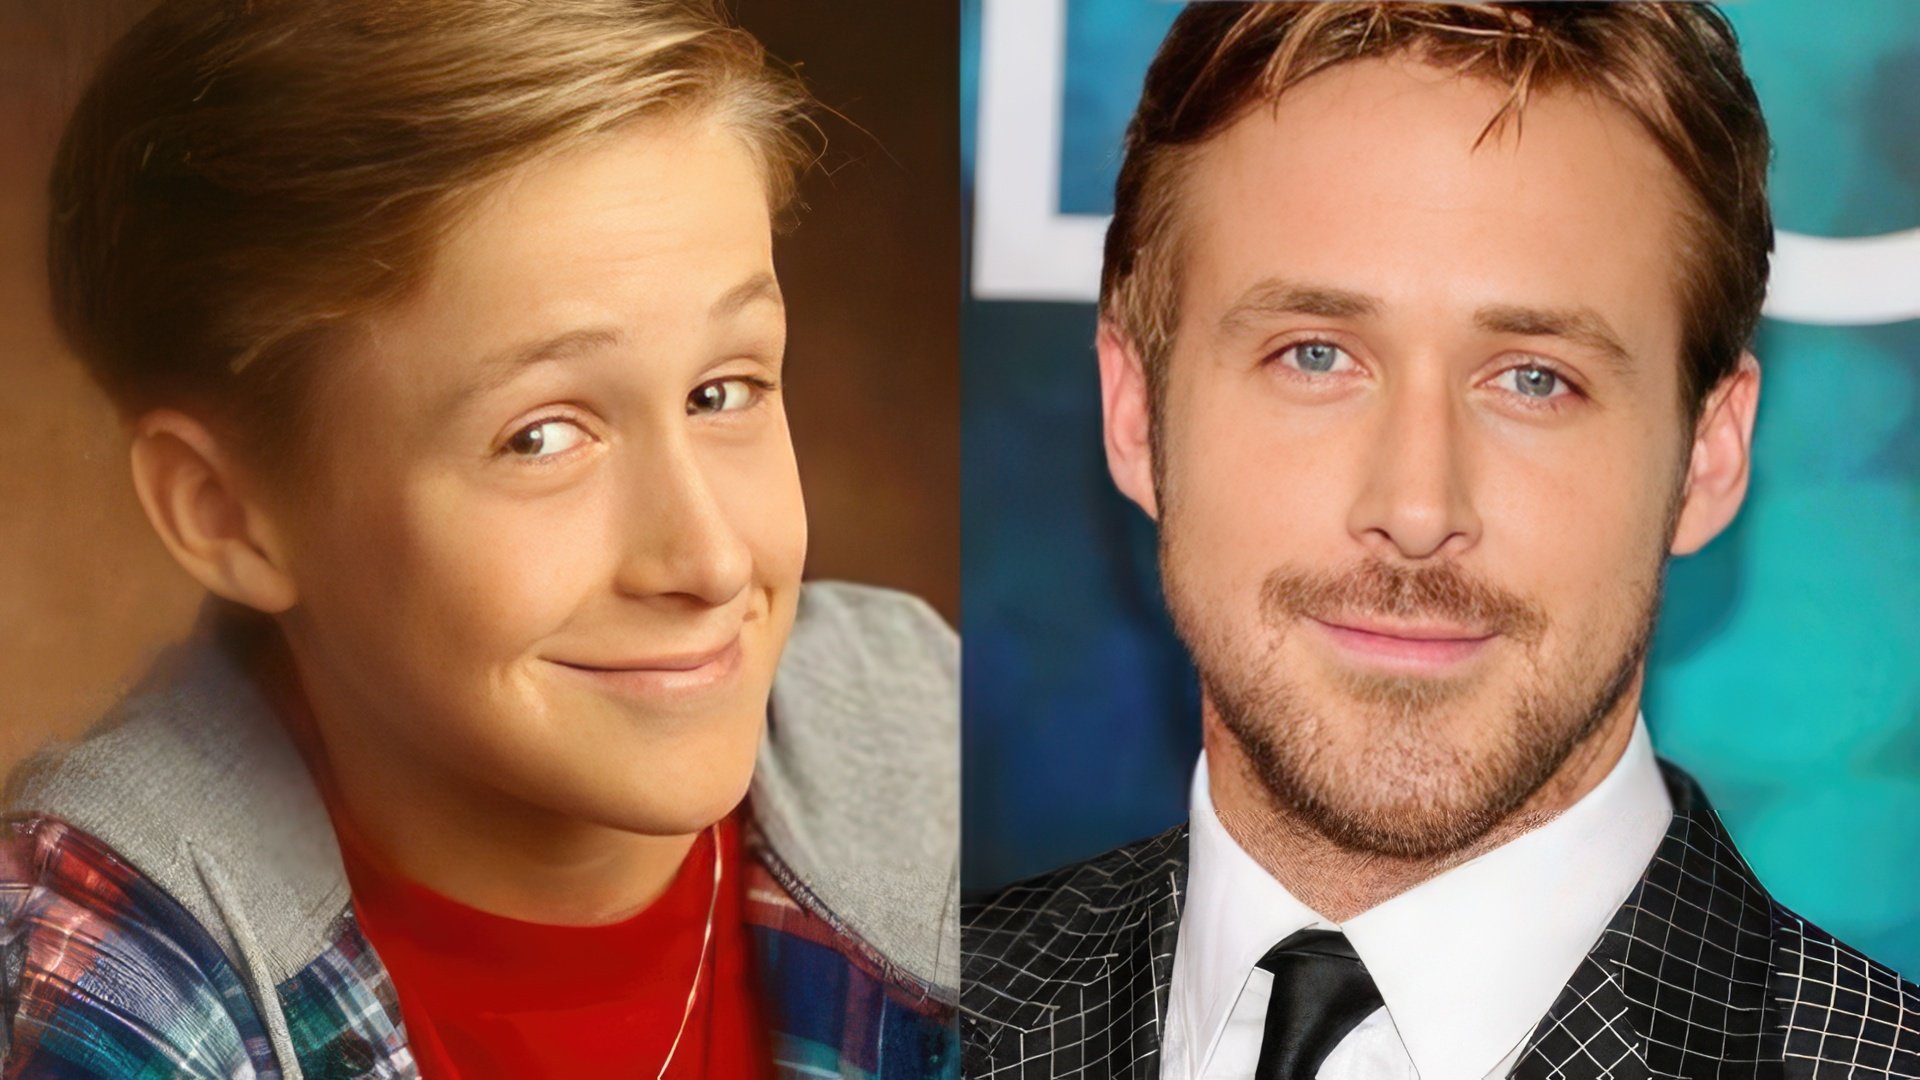 Ryan Gosling in childhood and now